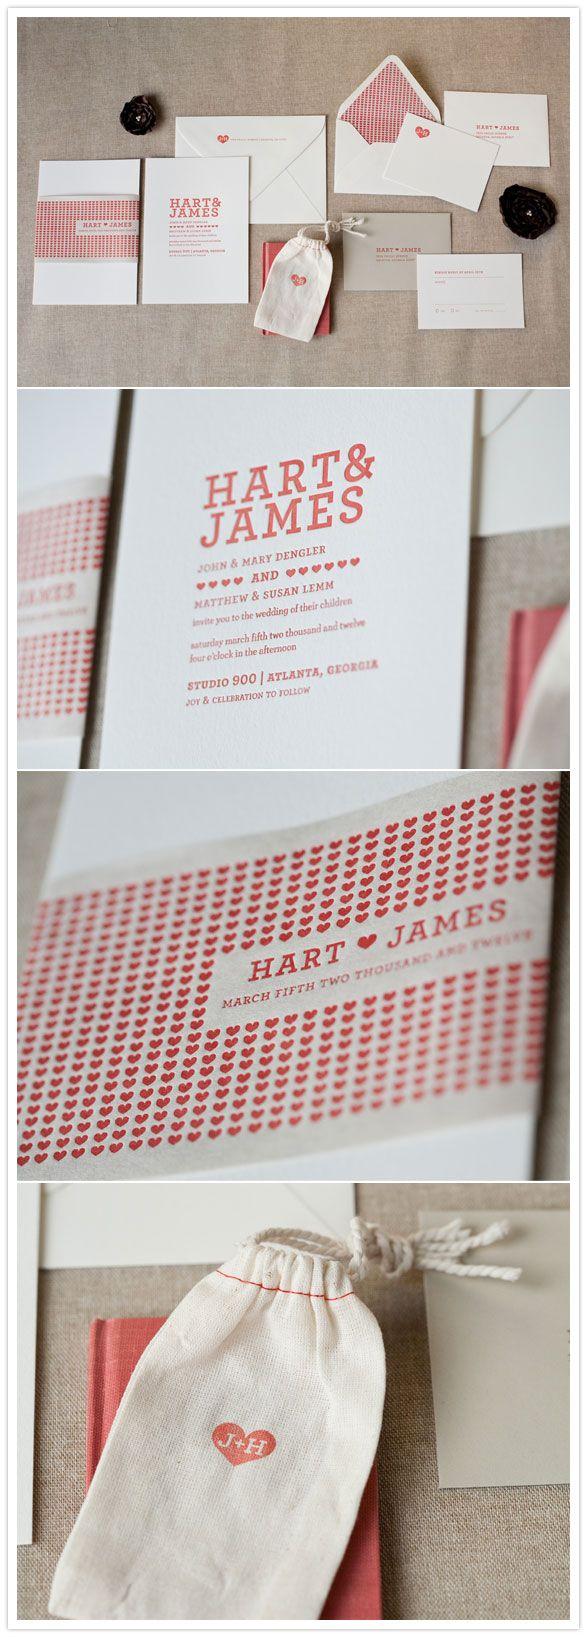 Mariage - INVITATIONS & SAVE THE DATE